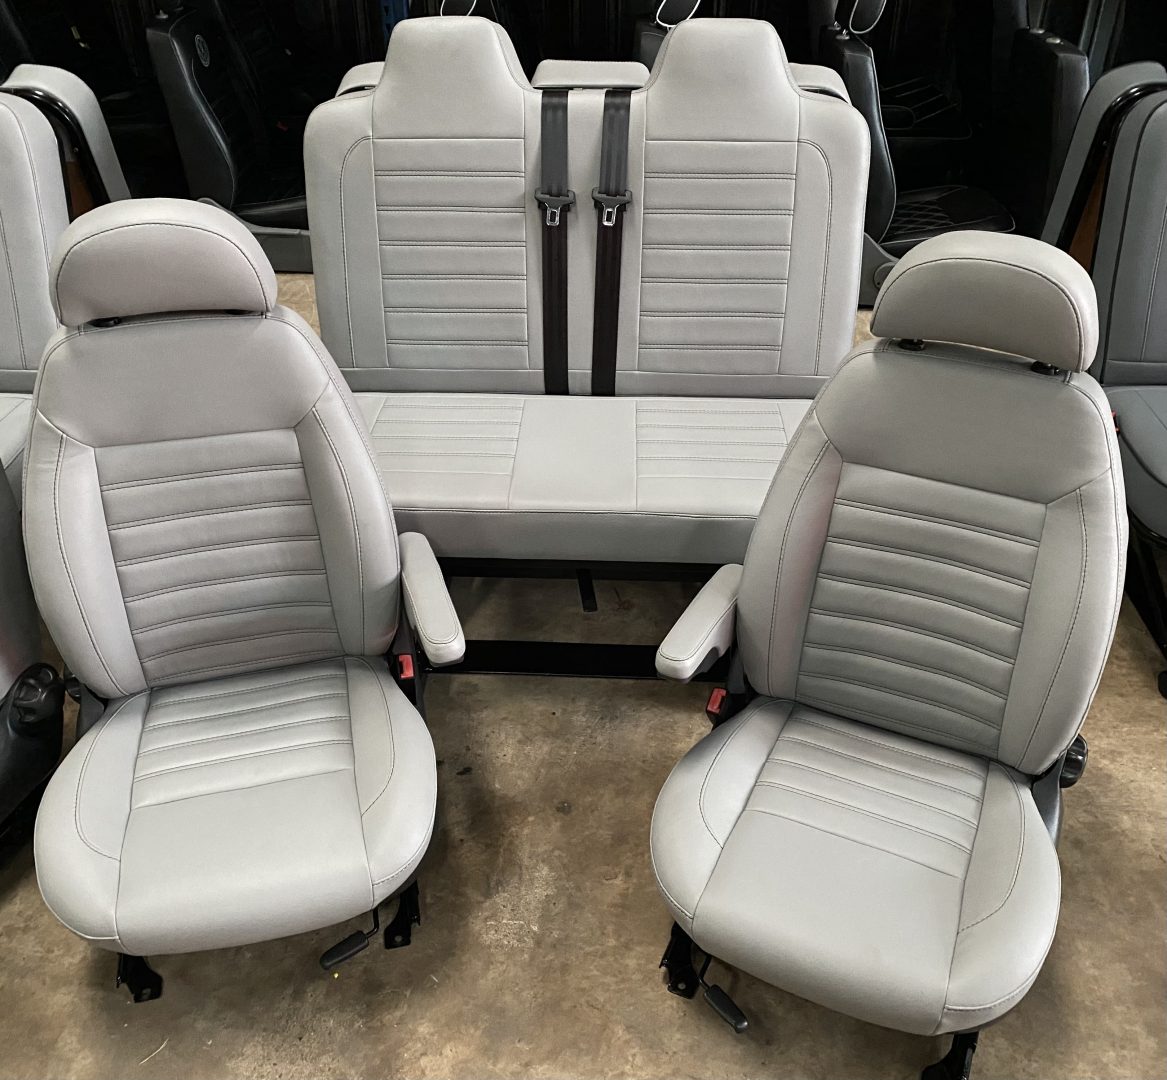 m1 tested bed and single swivel seats